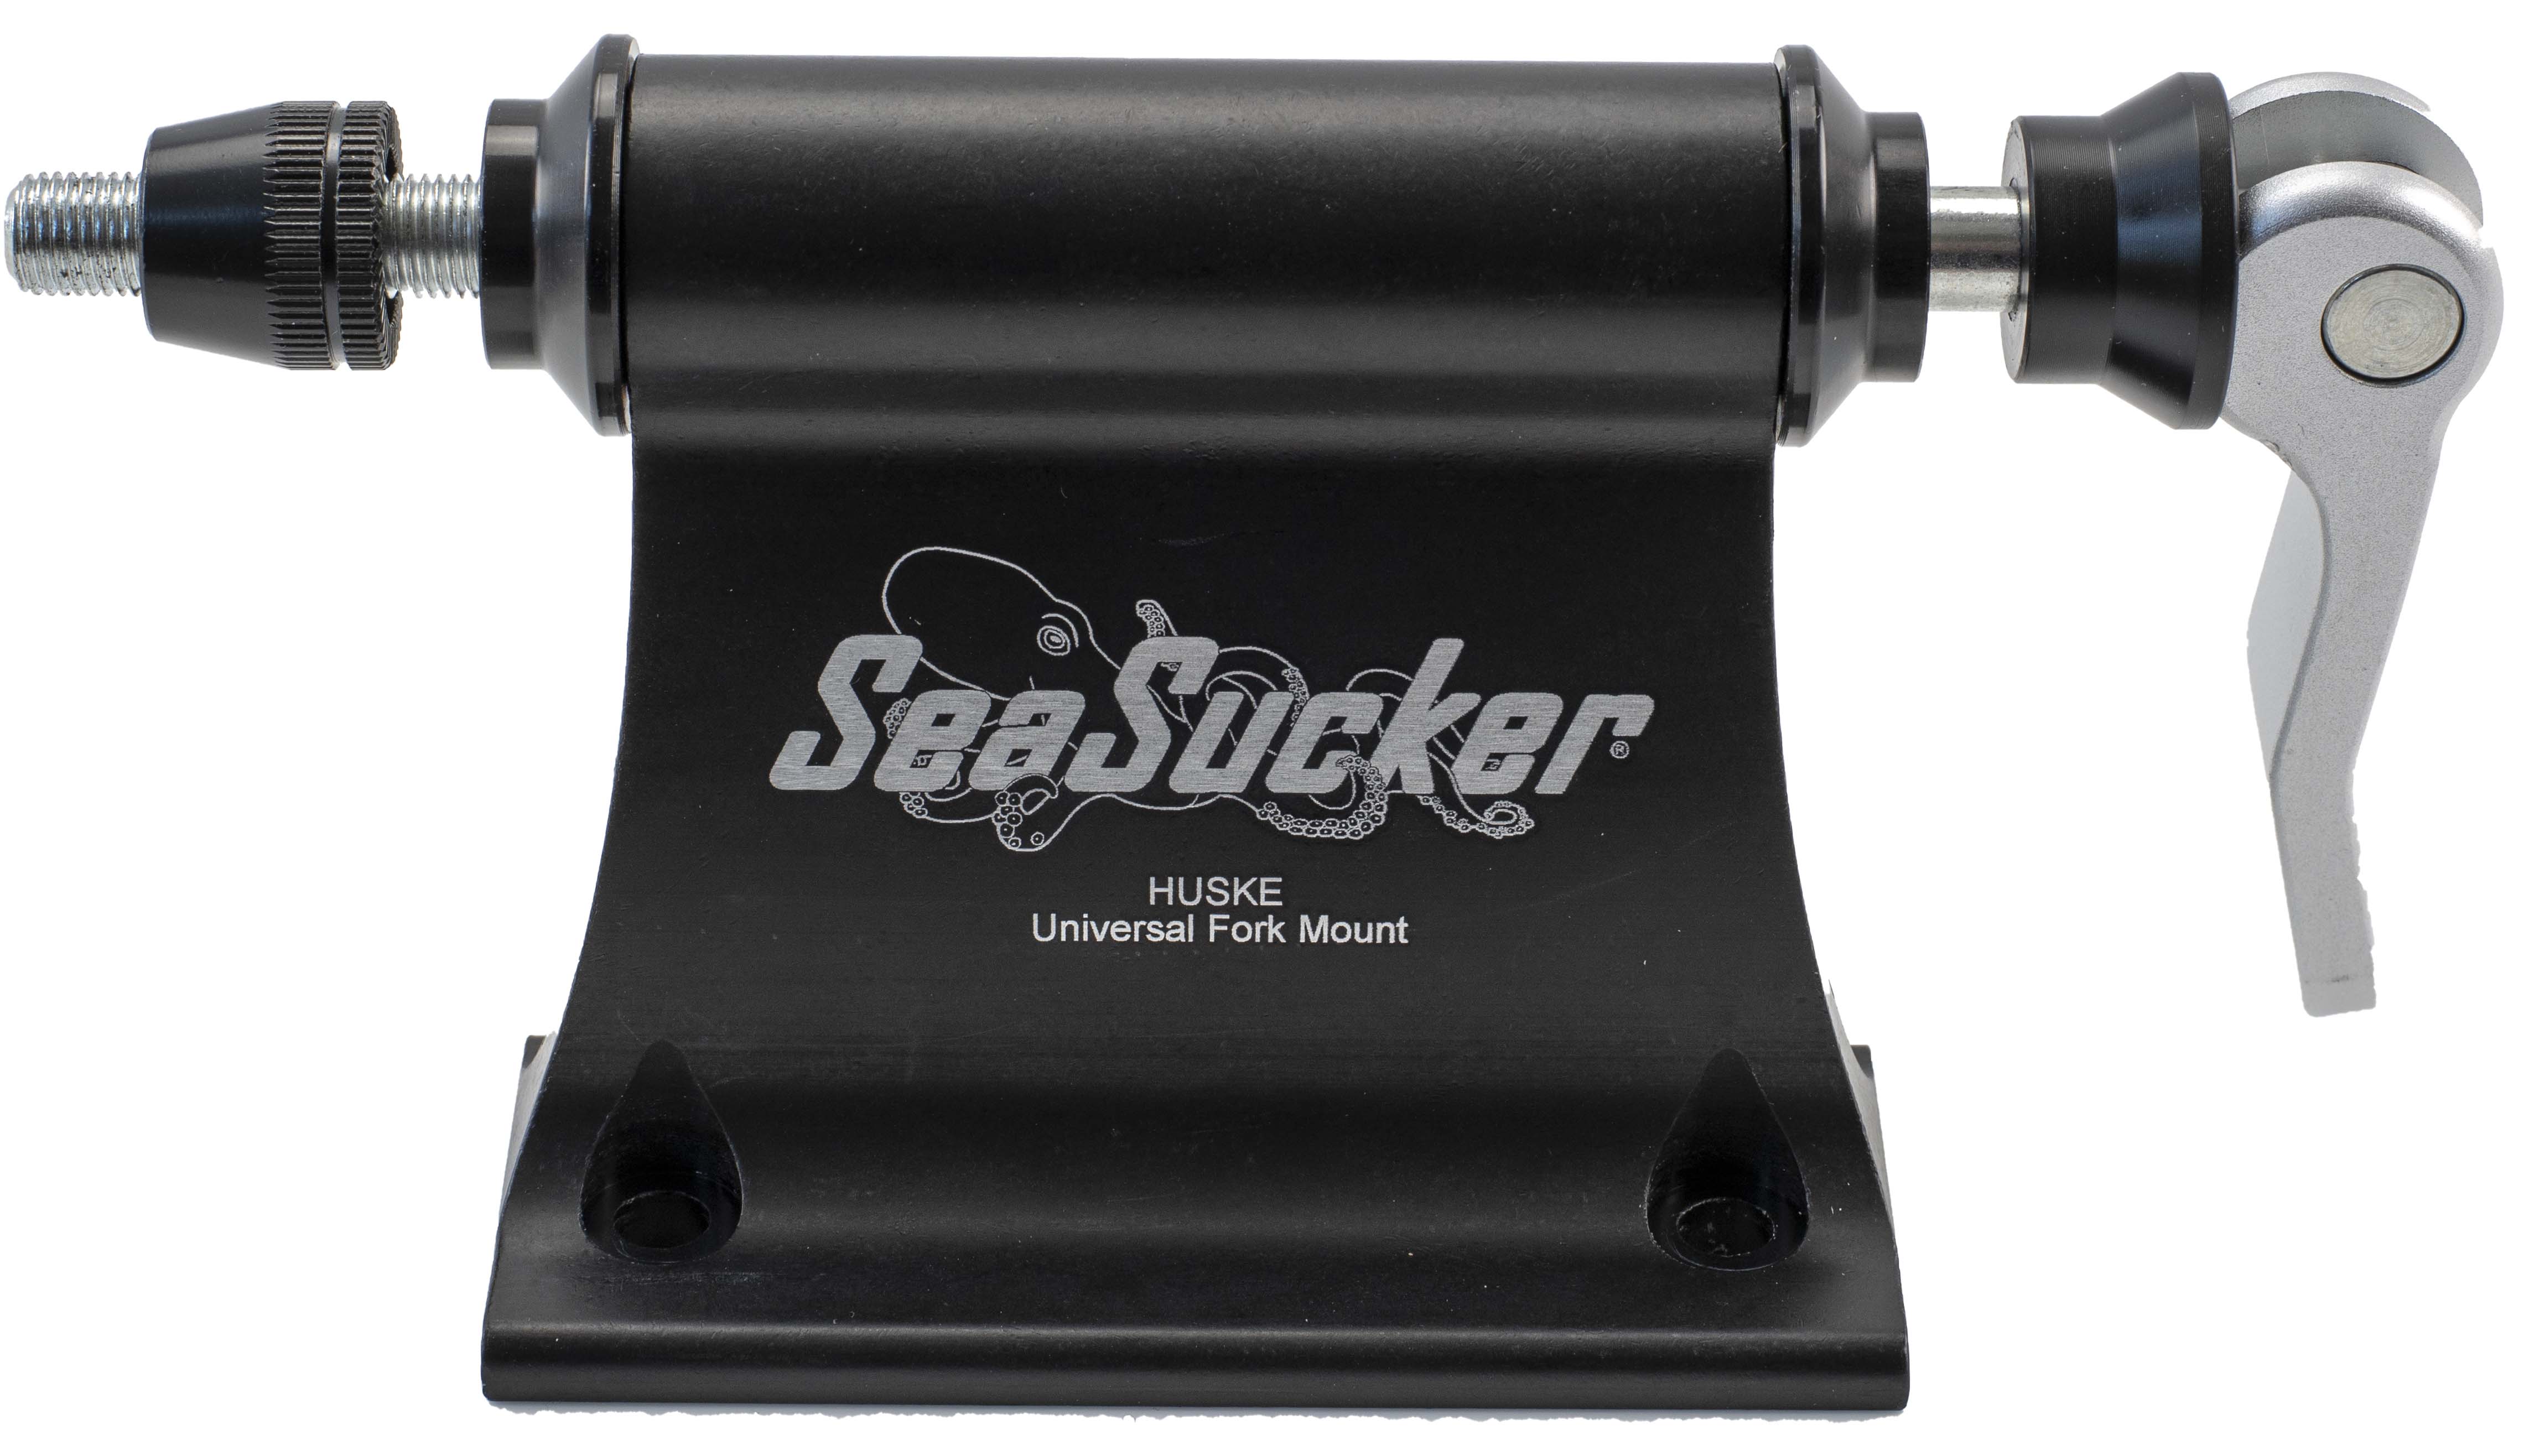 SeaSucker HUSKE with Quick-Release Fork Plugs and Skewer installed